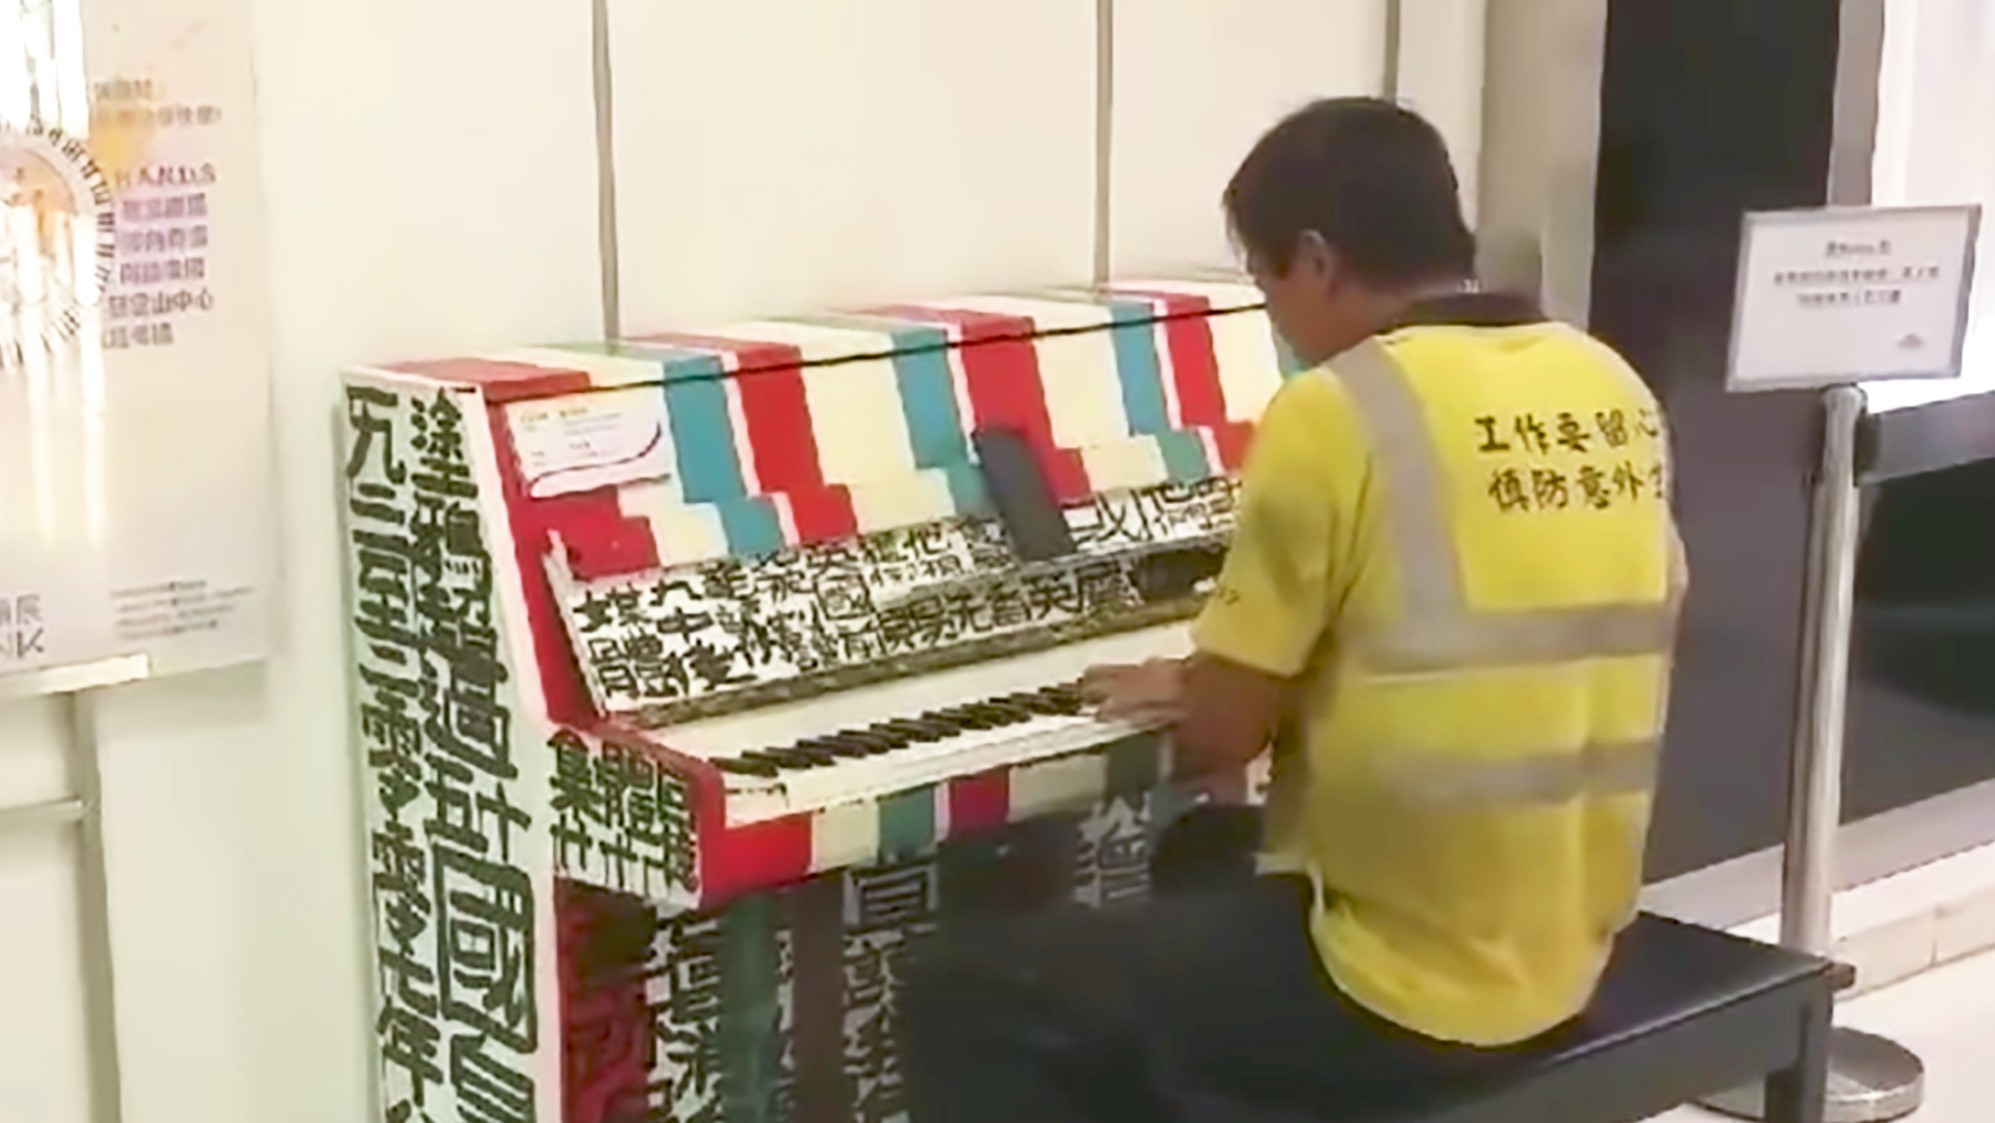 The mystery man in construction worker garb plays a piano in Sheung Tak Plaza in Tseung Kwan O. Photo: Facebook